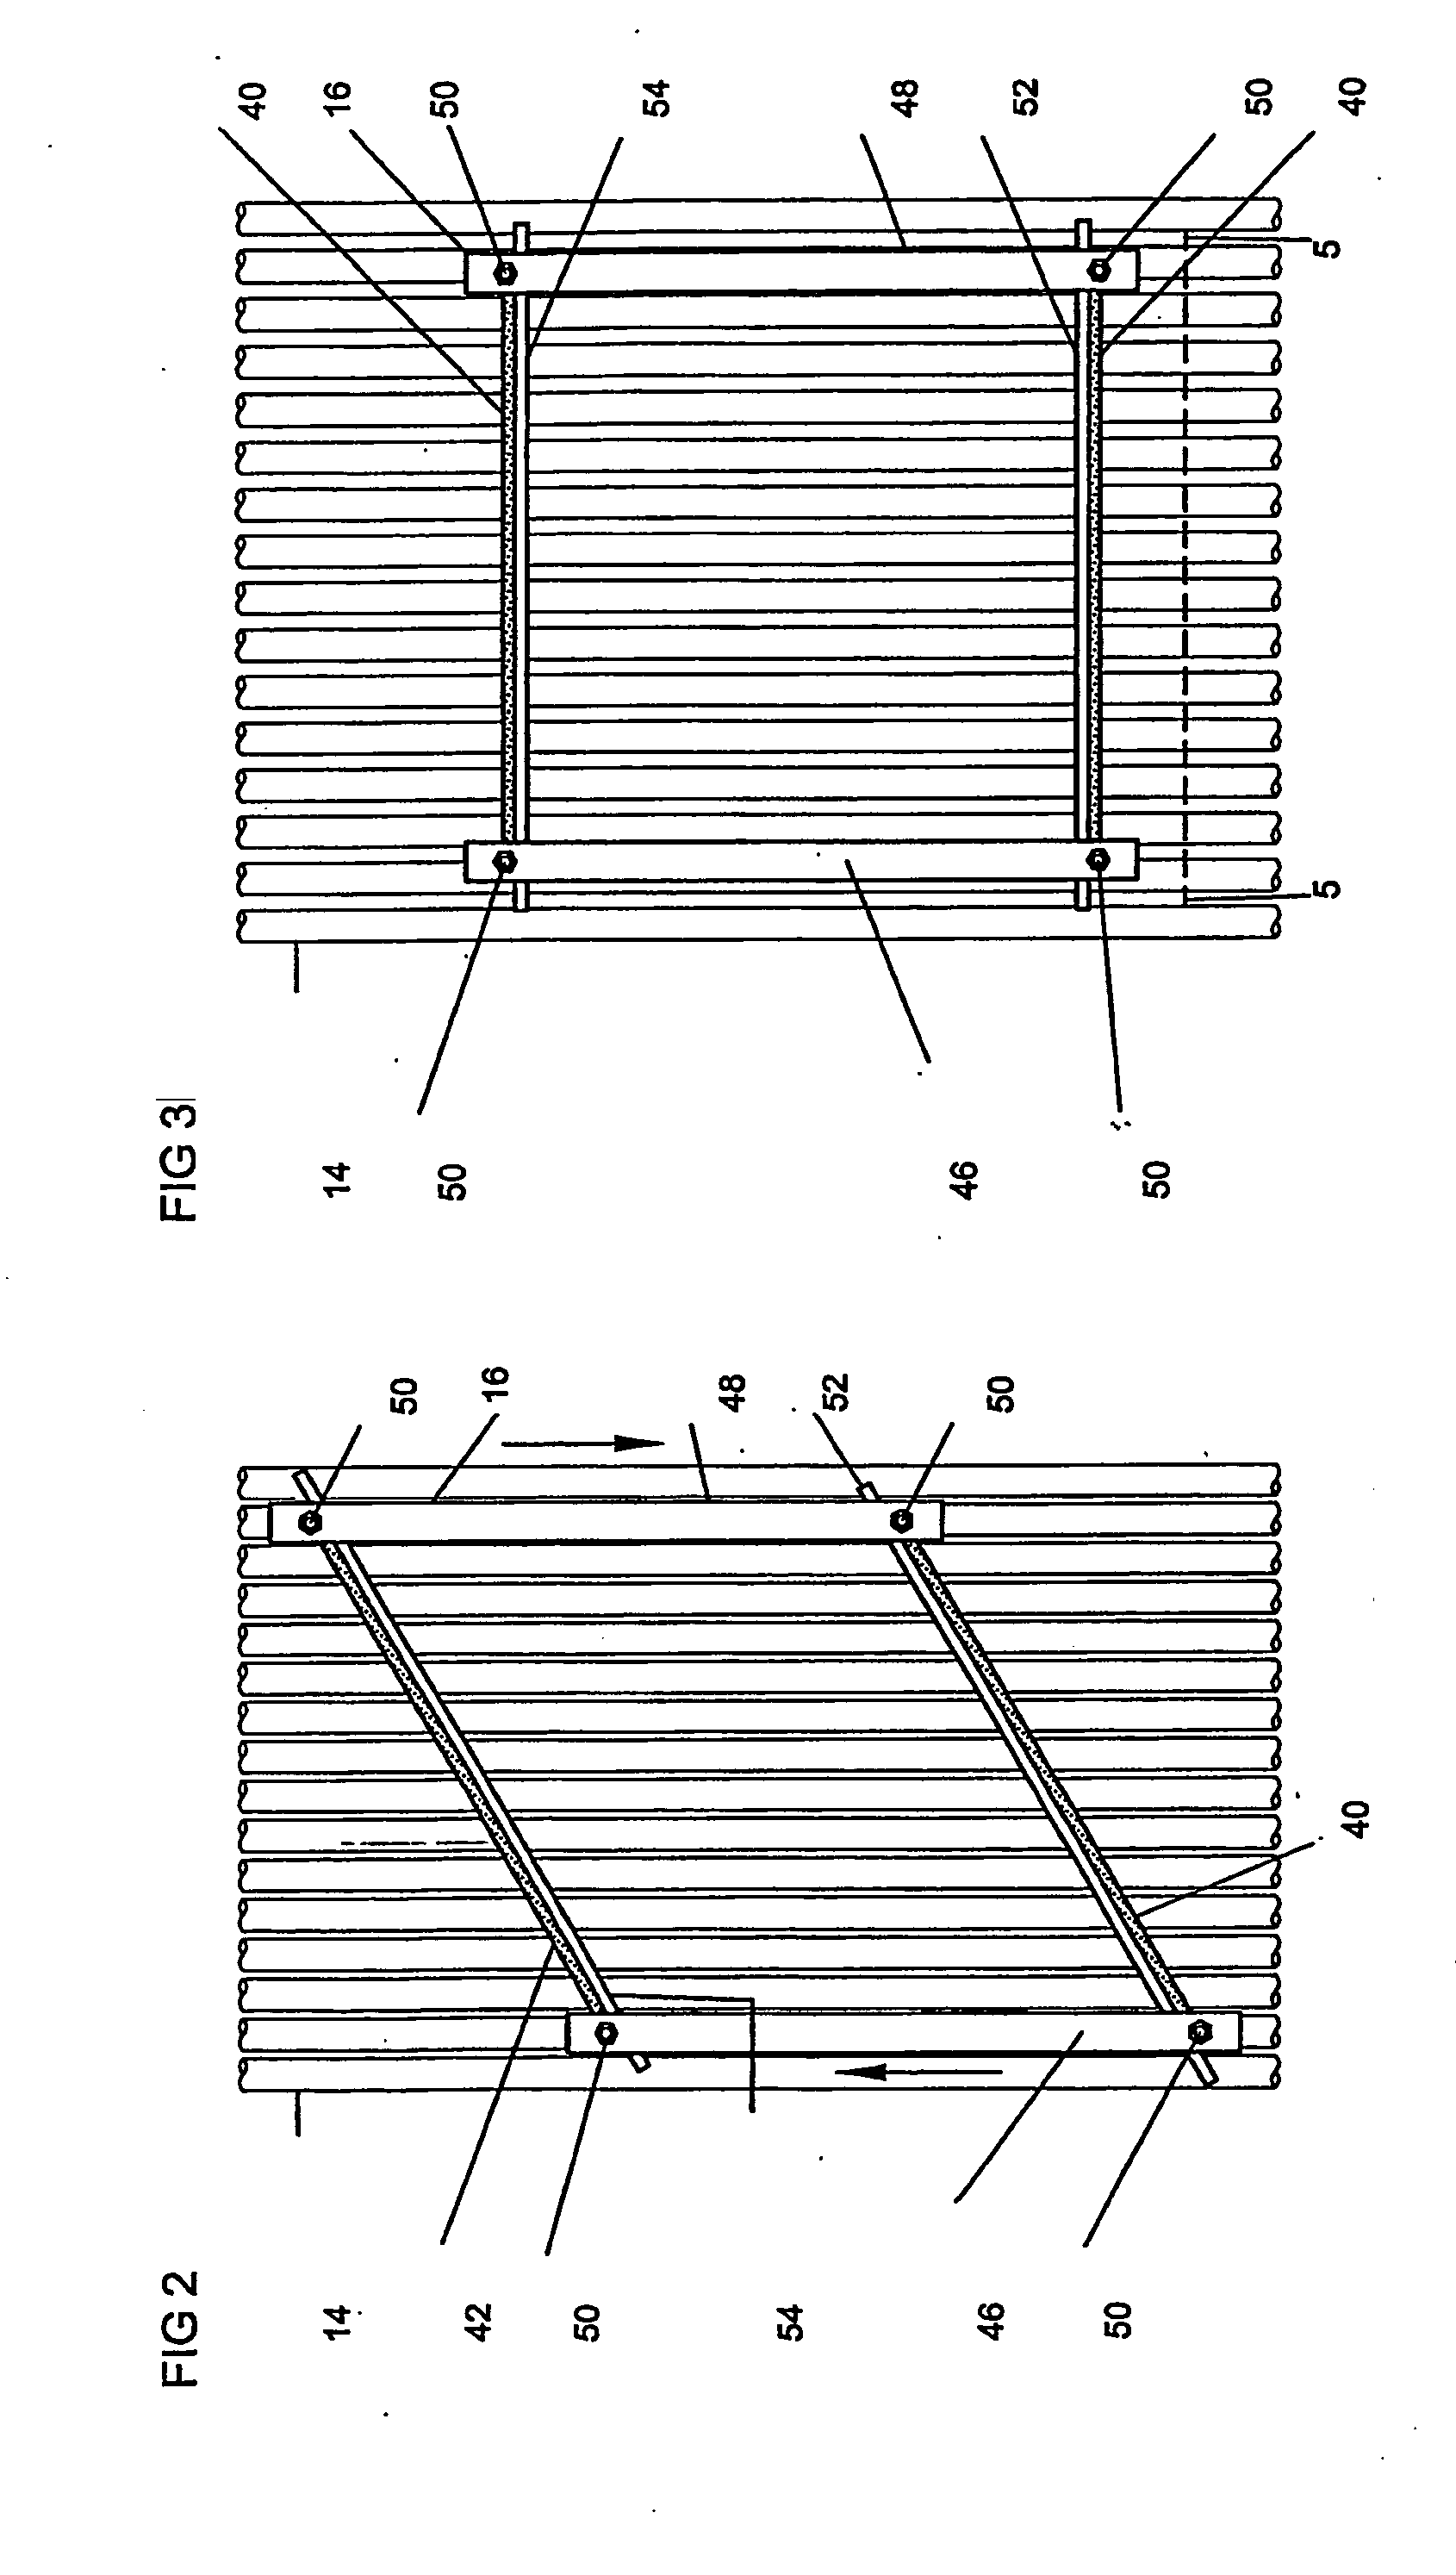 Spreading device and adjustable grading system incorporating same